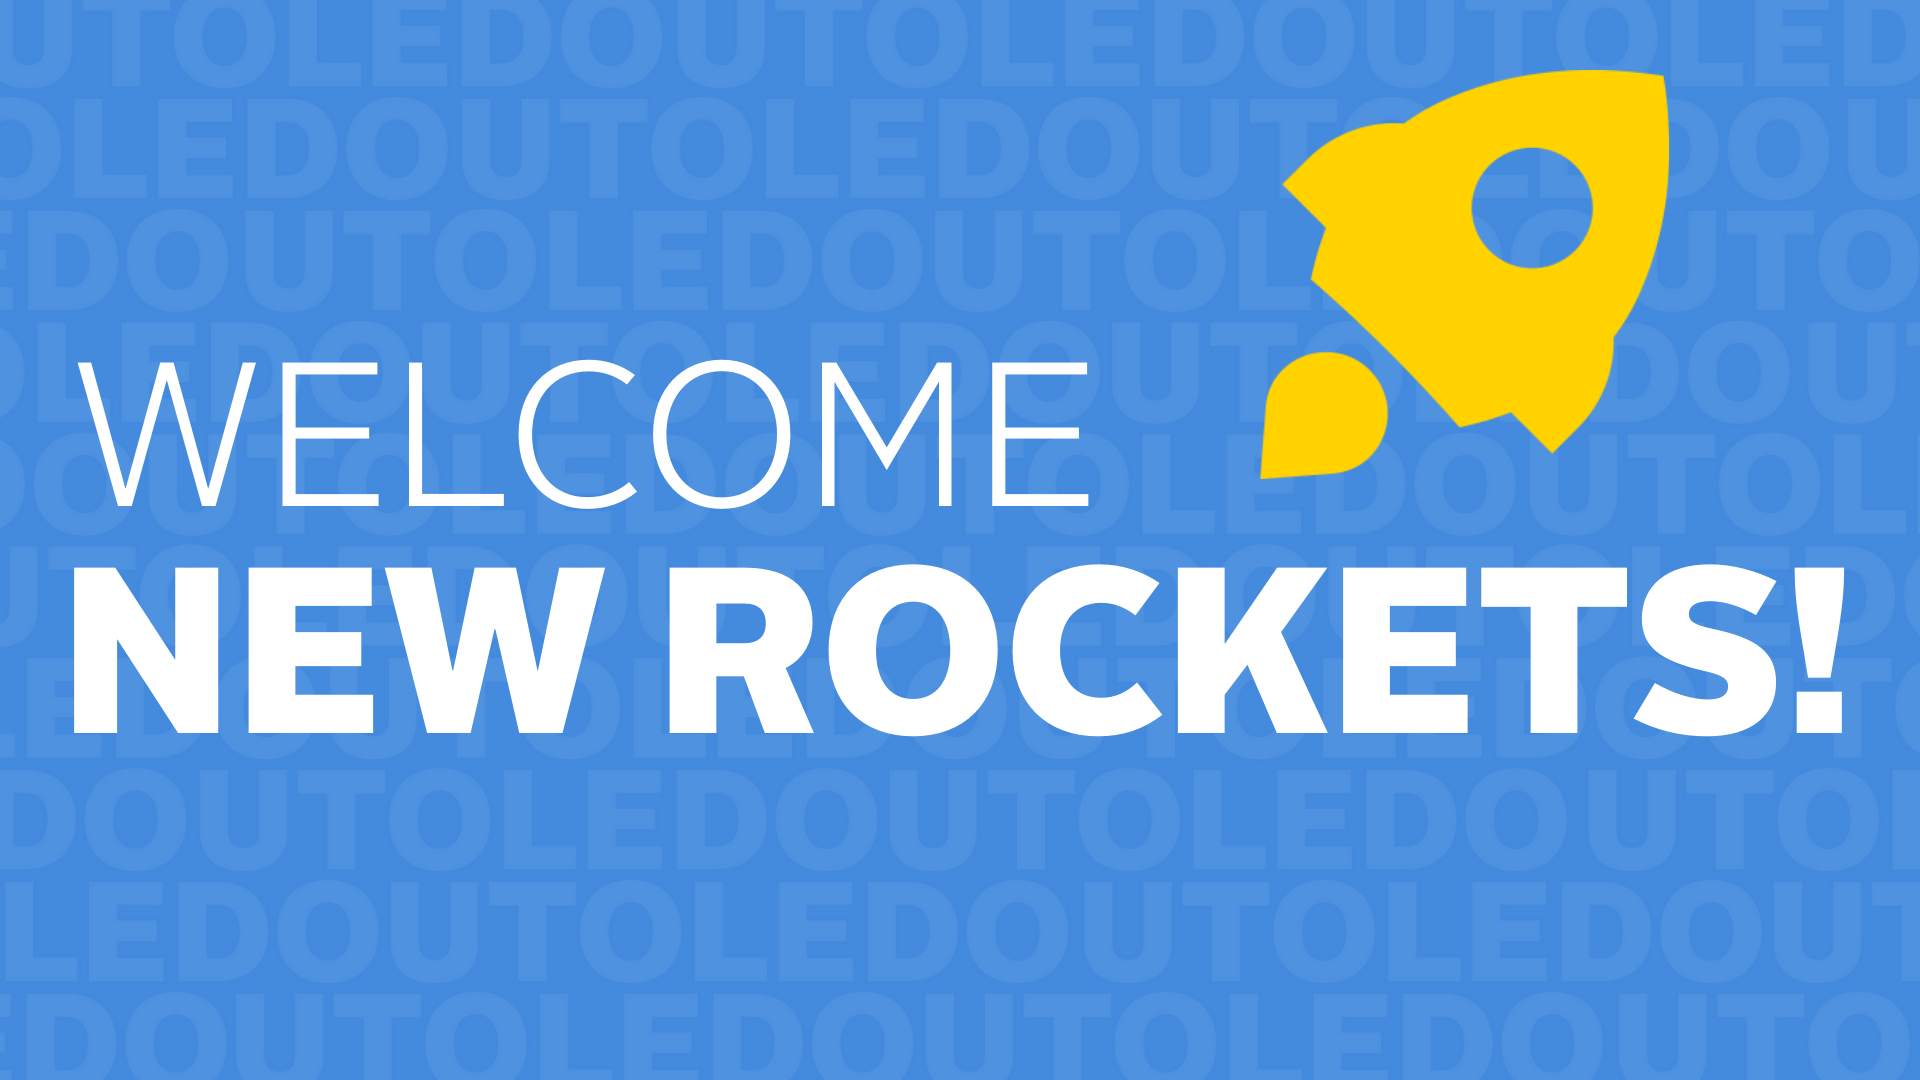 Welcome New Rockets Heading